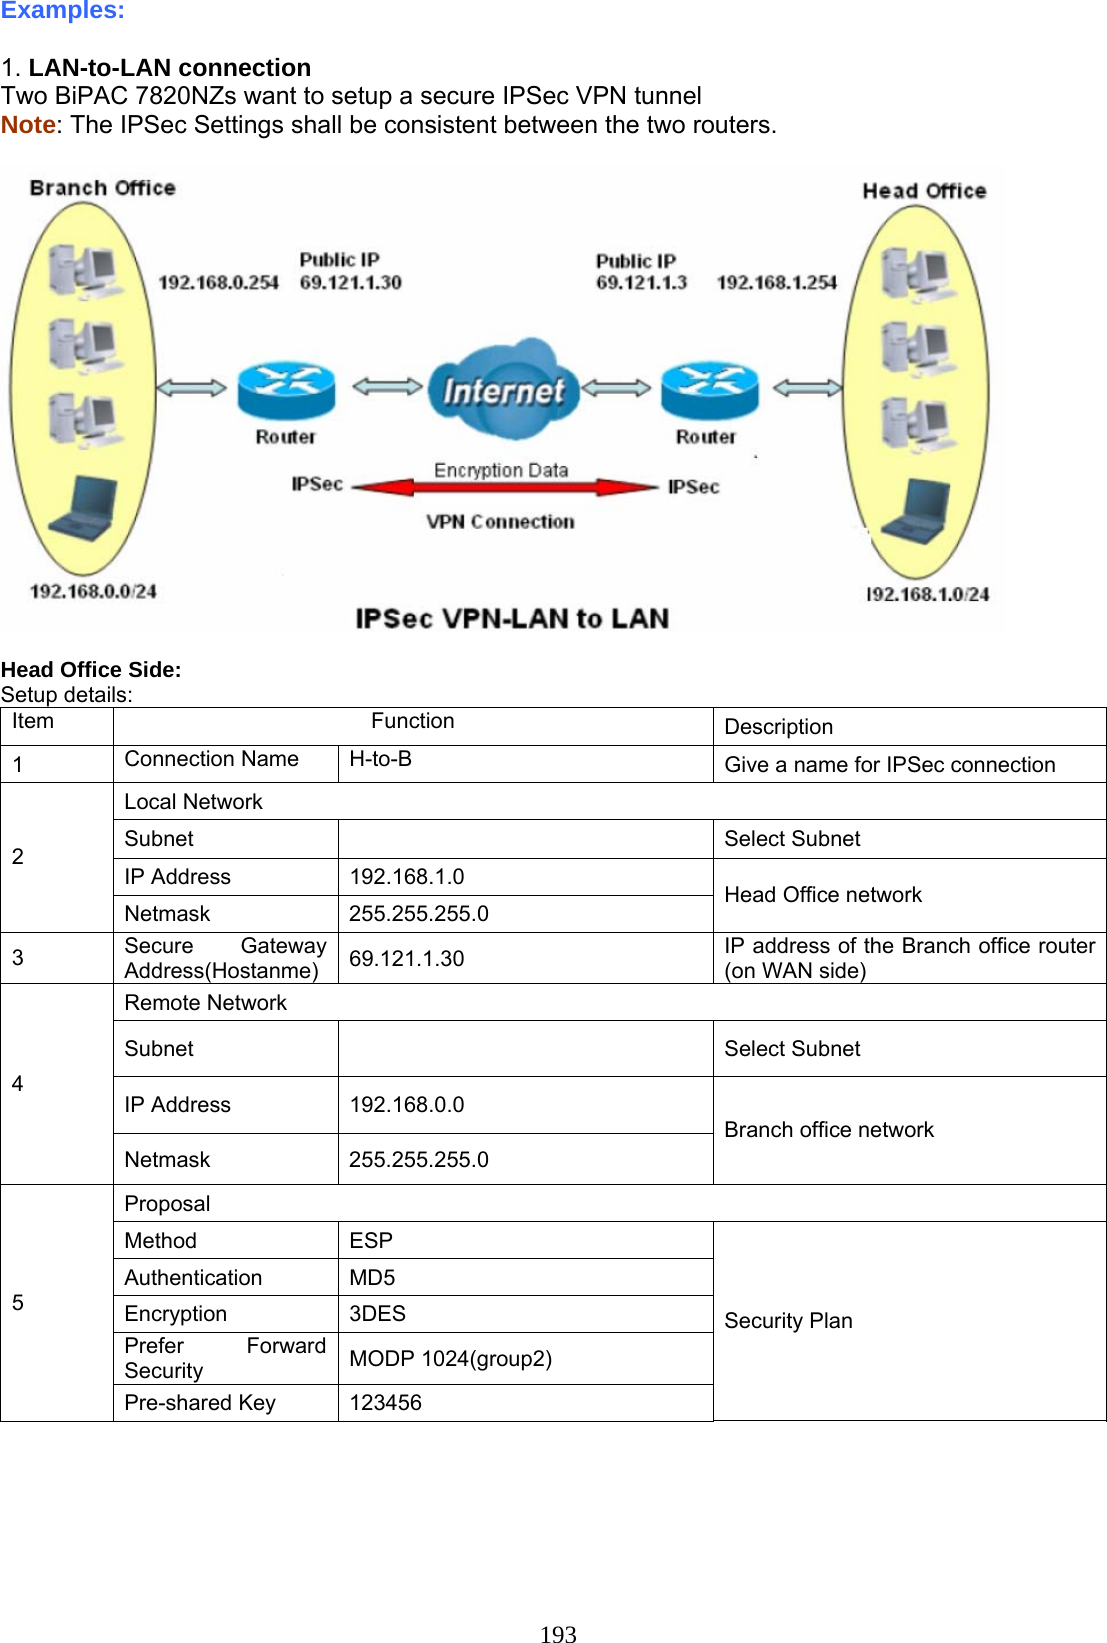 193 Examples:   1. LAN-to-LAN connection Two BiPAC 7820NZs want to setup a secure IPSec VPN tunnel  Note: The IPSec Settings shall be consistent between the two routers.    Head Office Side: Setup details: Item Function Description 1  Connection Name  H-to-B  Give a name for IPSec connection Local Network Subnet   Select Subnet  IP Address  192.168.1.0 2 Netmask 255.255.255.0  Head Office network 3  Secure Gateway Address(Hostanme)  69.121.1.30  IP address of the Branch office router (on WAN side) Remote Network Subnet   Select Subnet IP Address  192.168.0.0 4 Netmask 255.255.255.0 Branch office network Proposal Method   ESP Authentication MD5 Encryption   3DES Prefer Forward Security   MODP 1024(group2) 5 Pre-shared Key  123456 Security Plan 